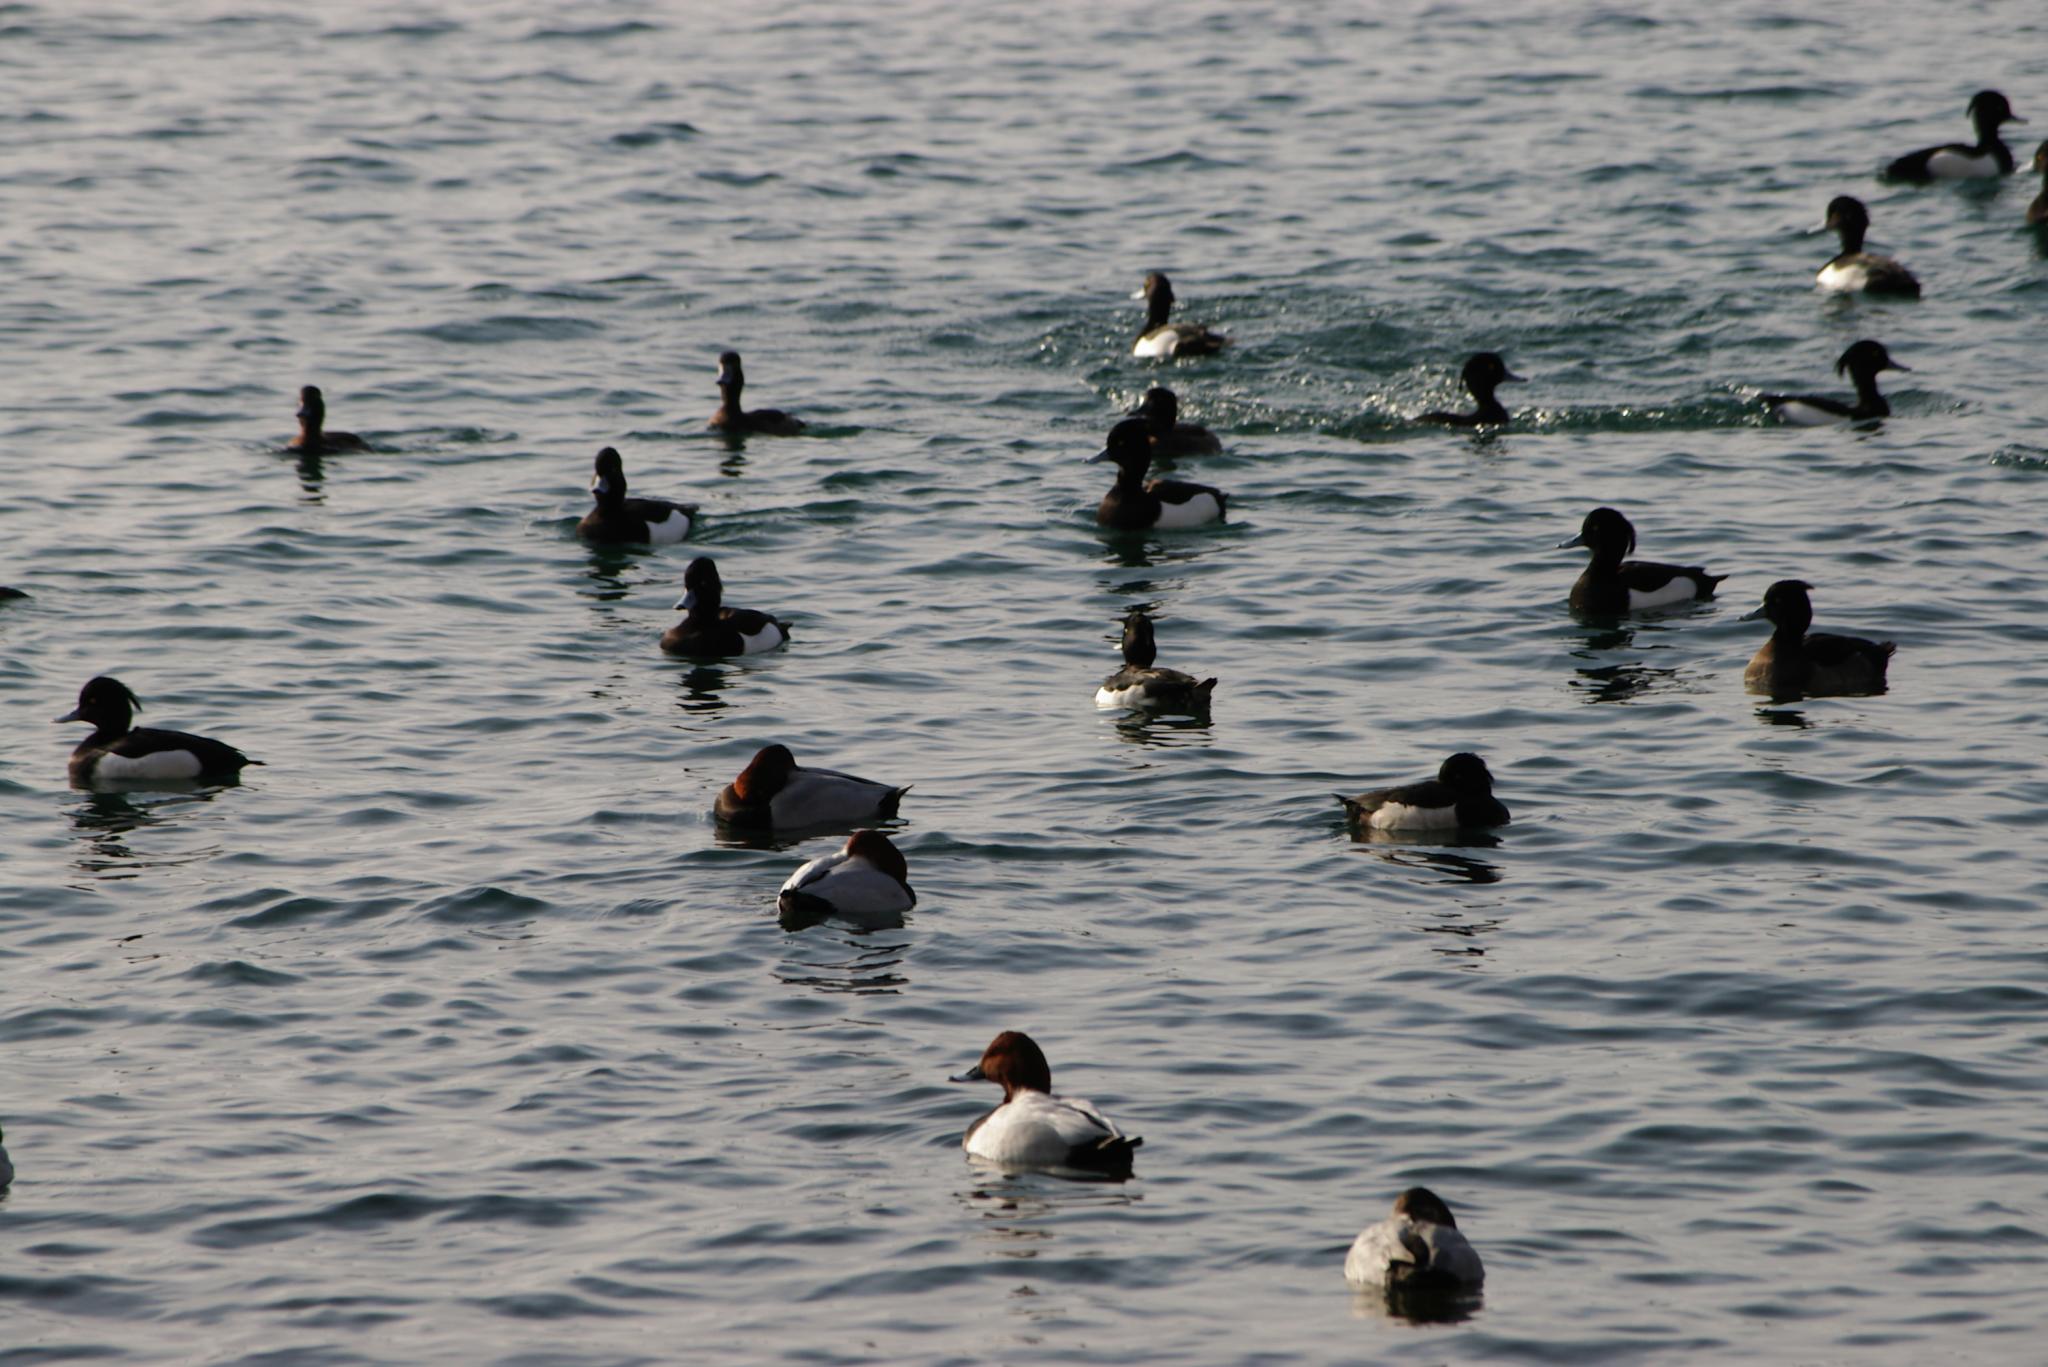 the group of ducks swim in the water